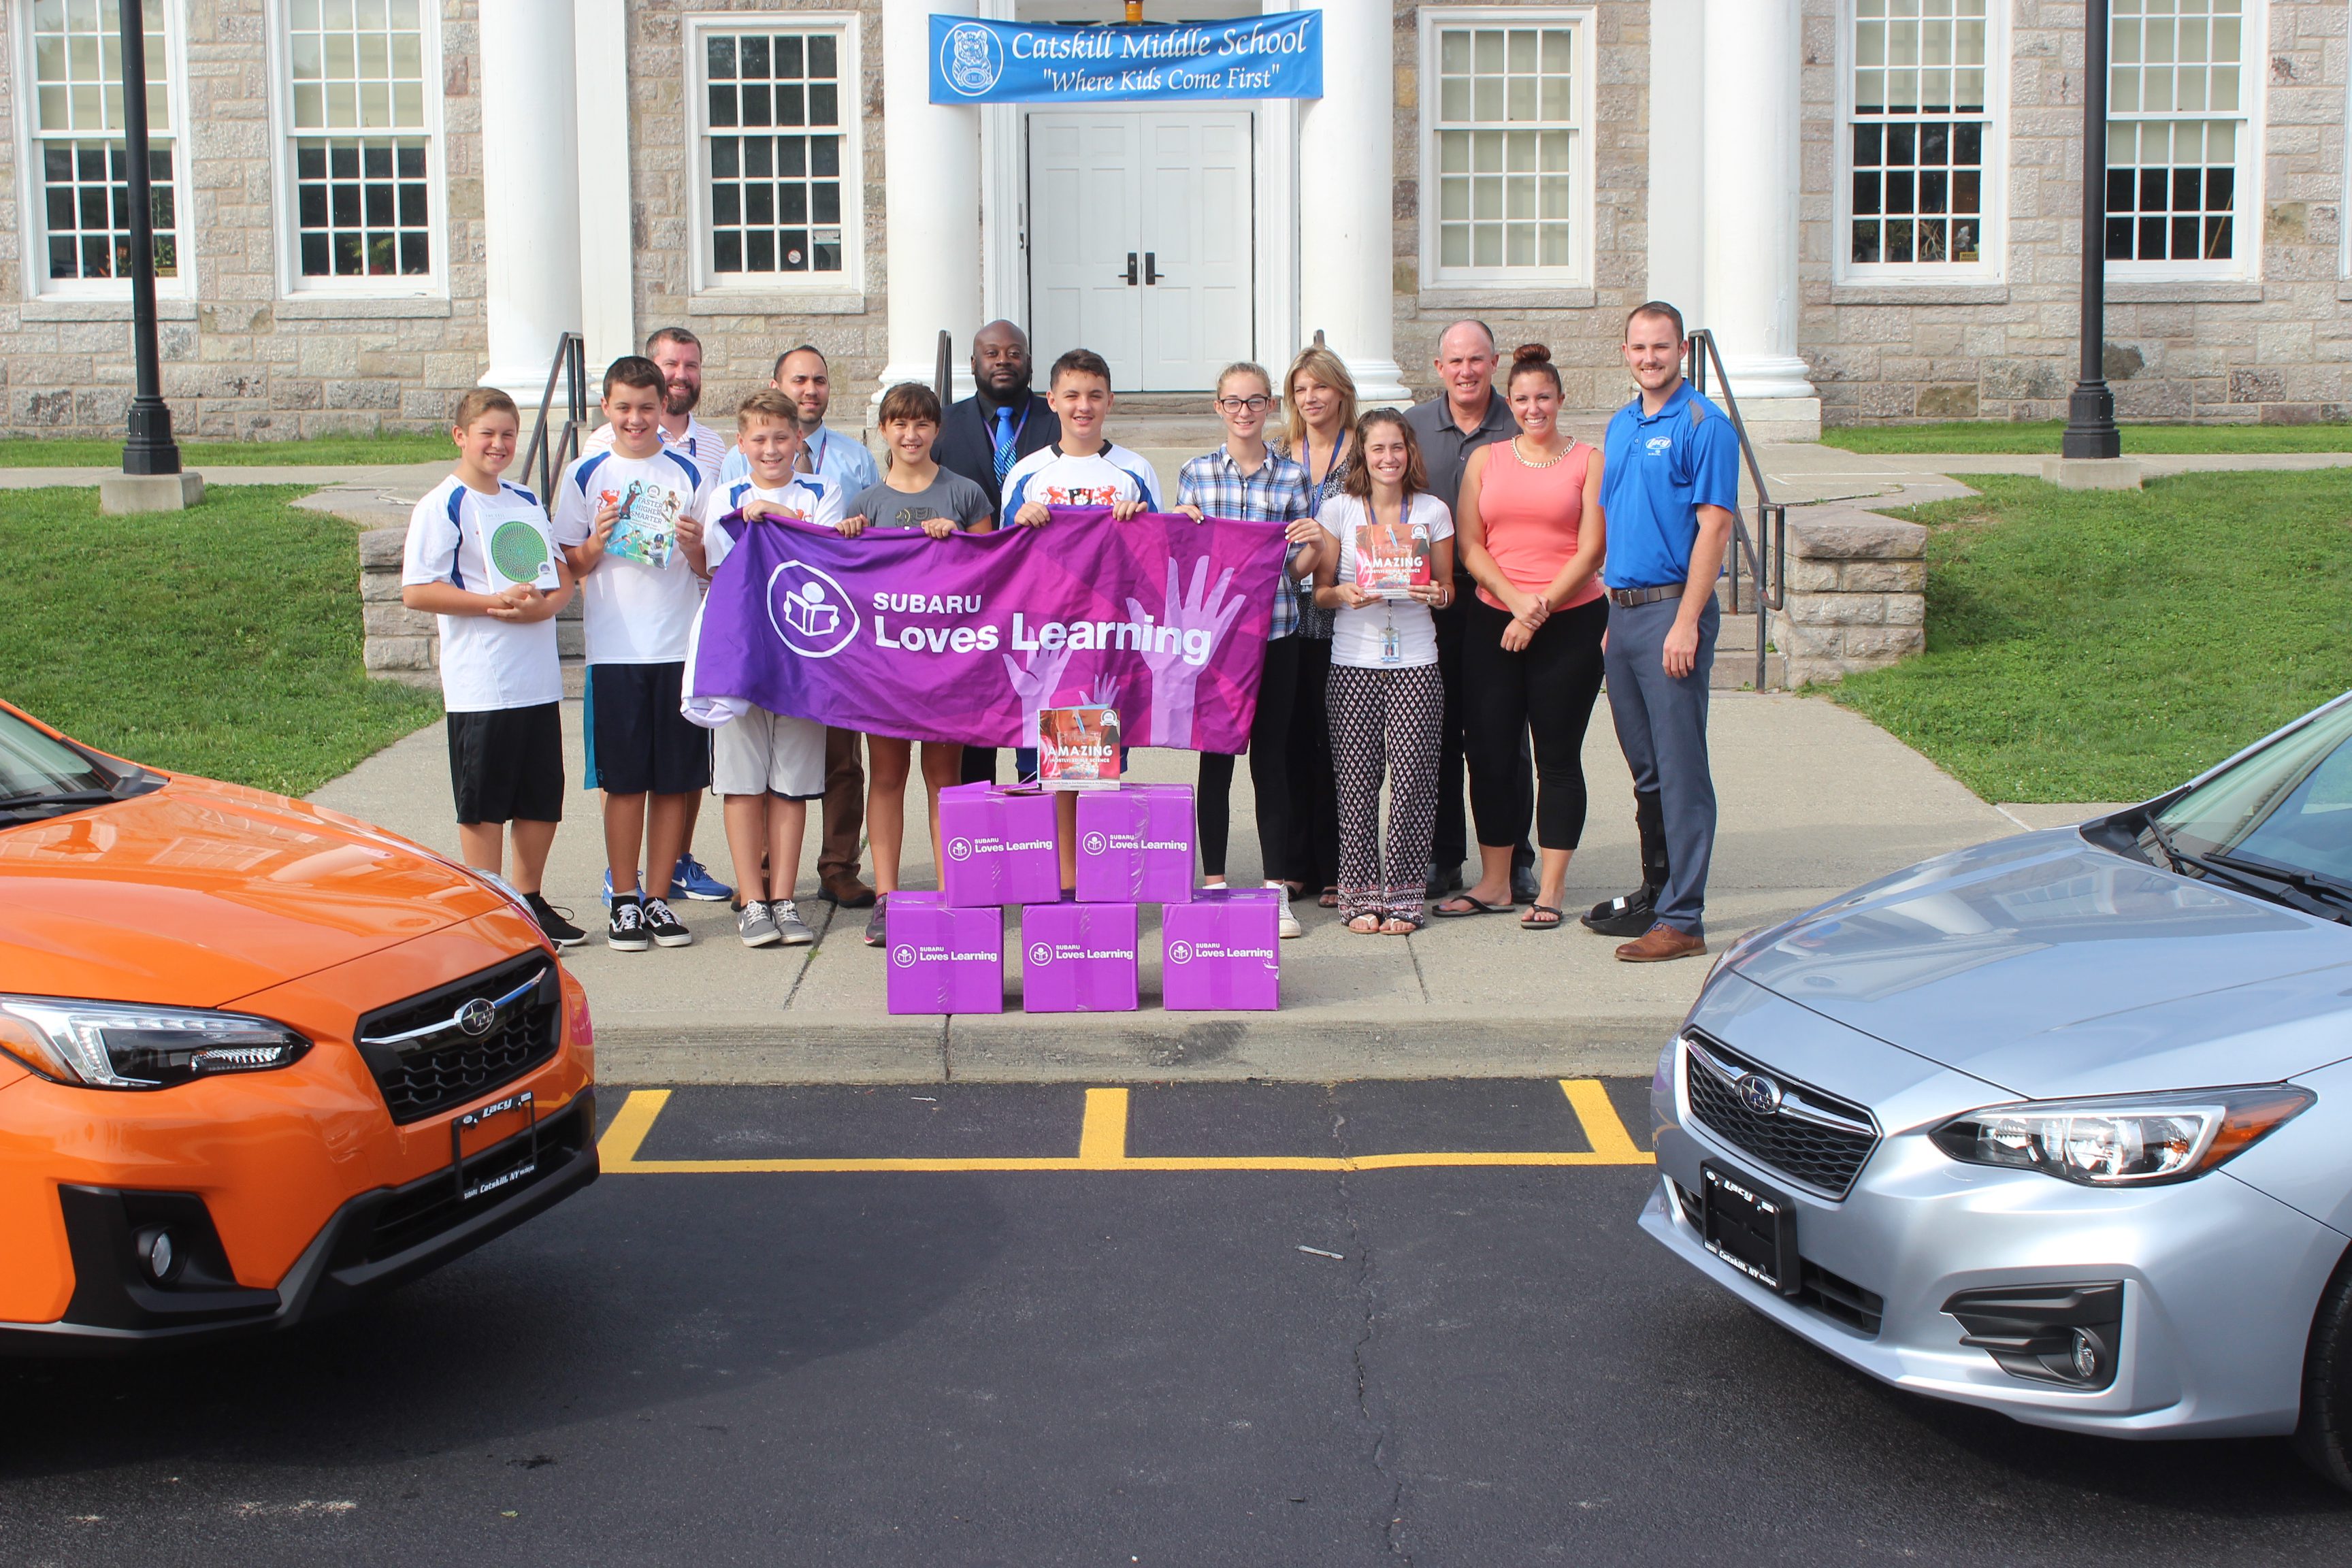 Group Photo of CMS and Lacy Subaru representatives with the books outside CMS